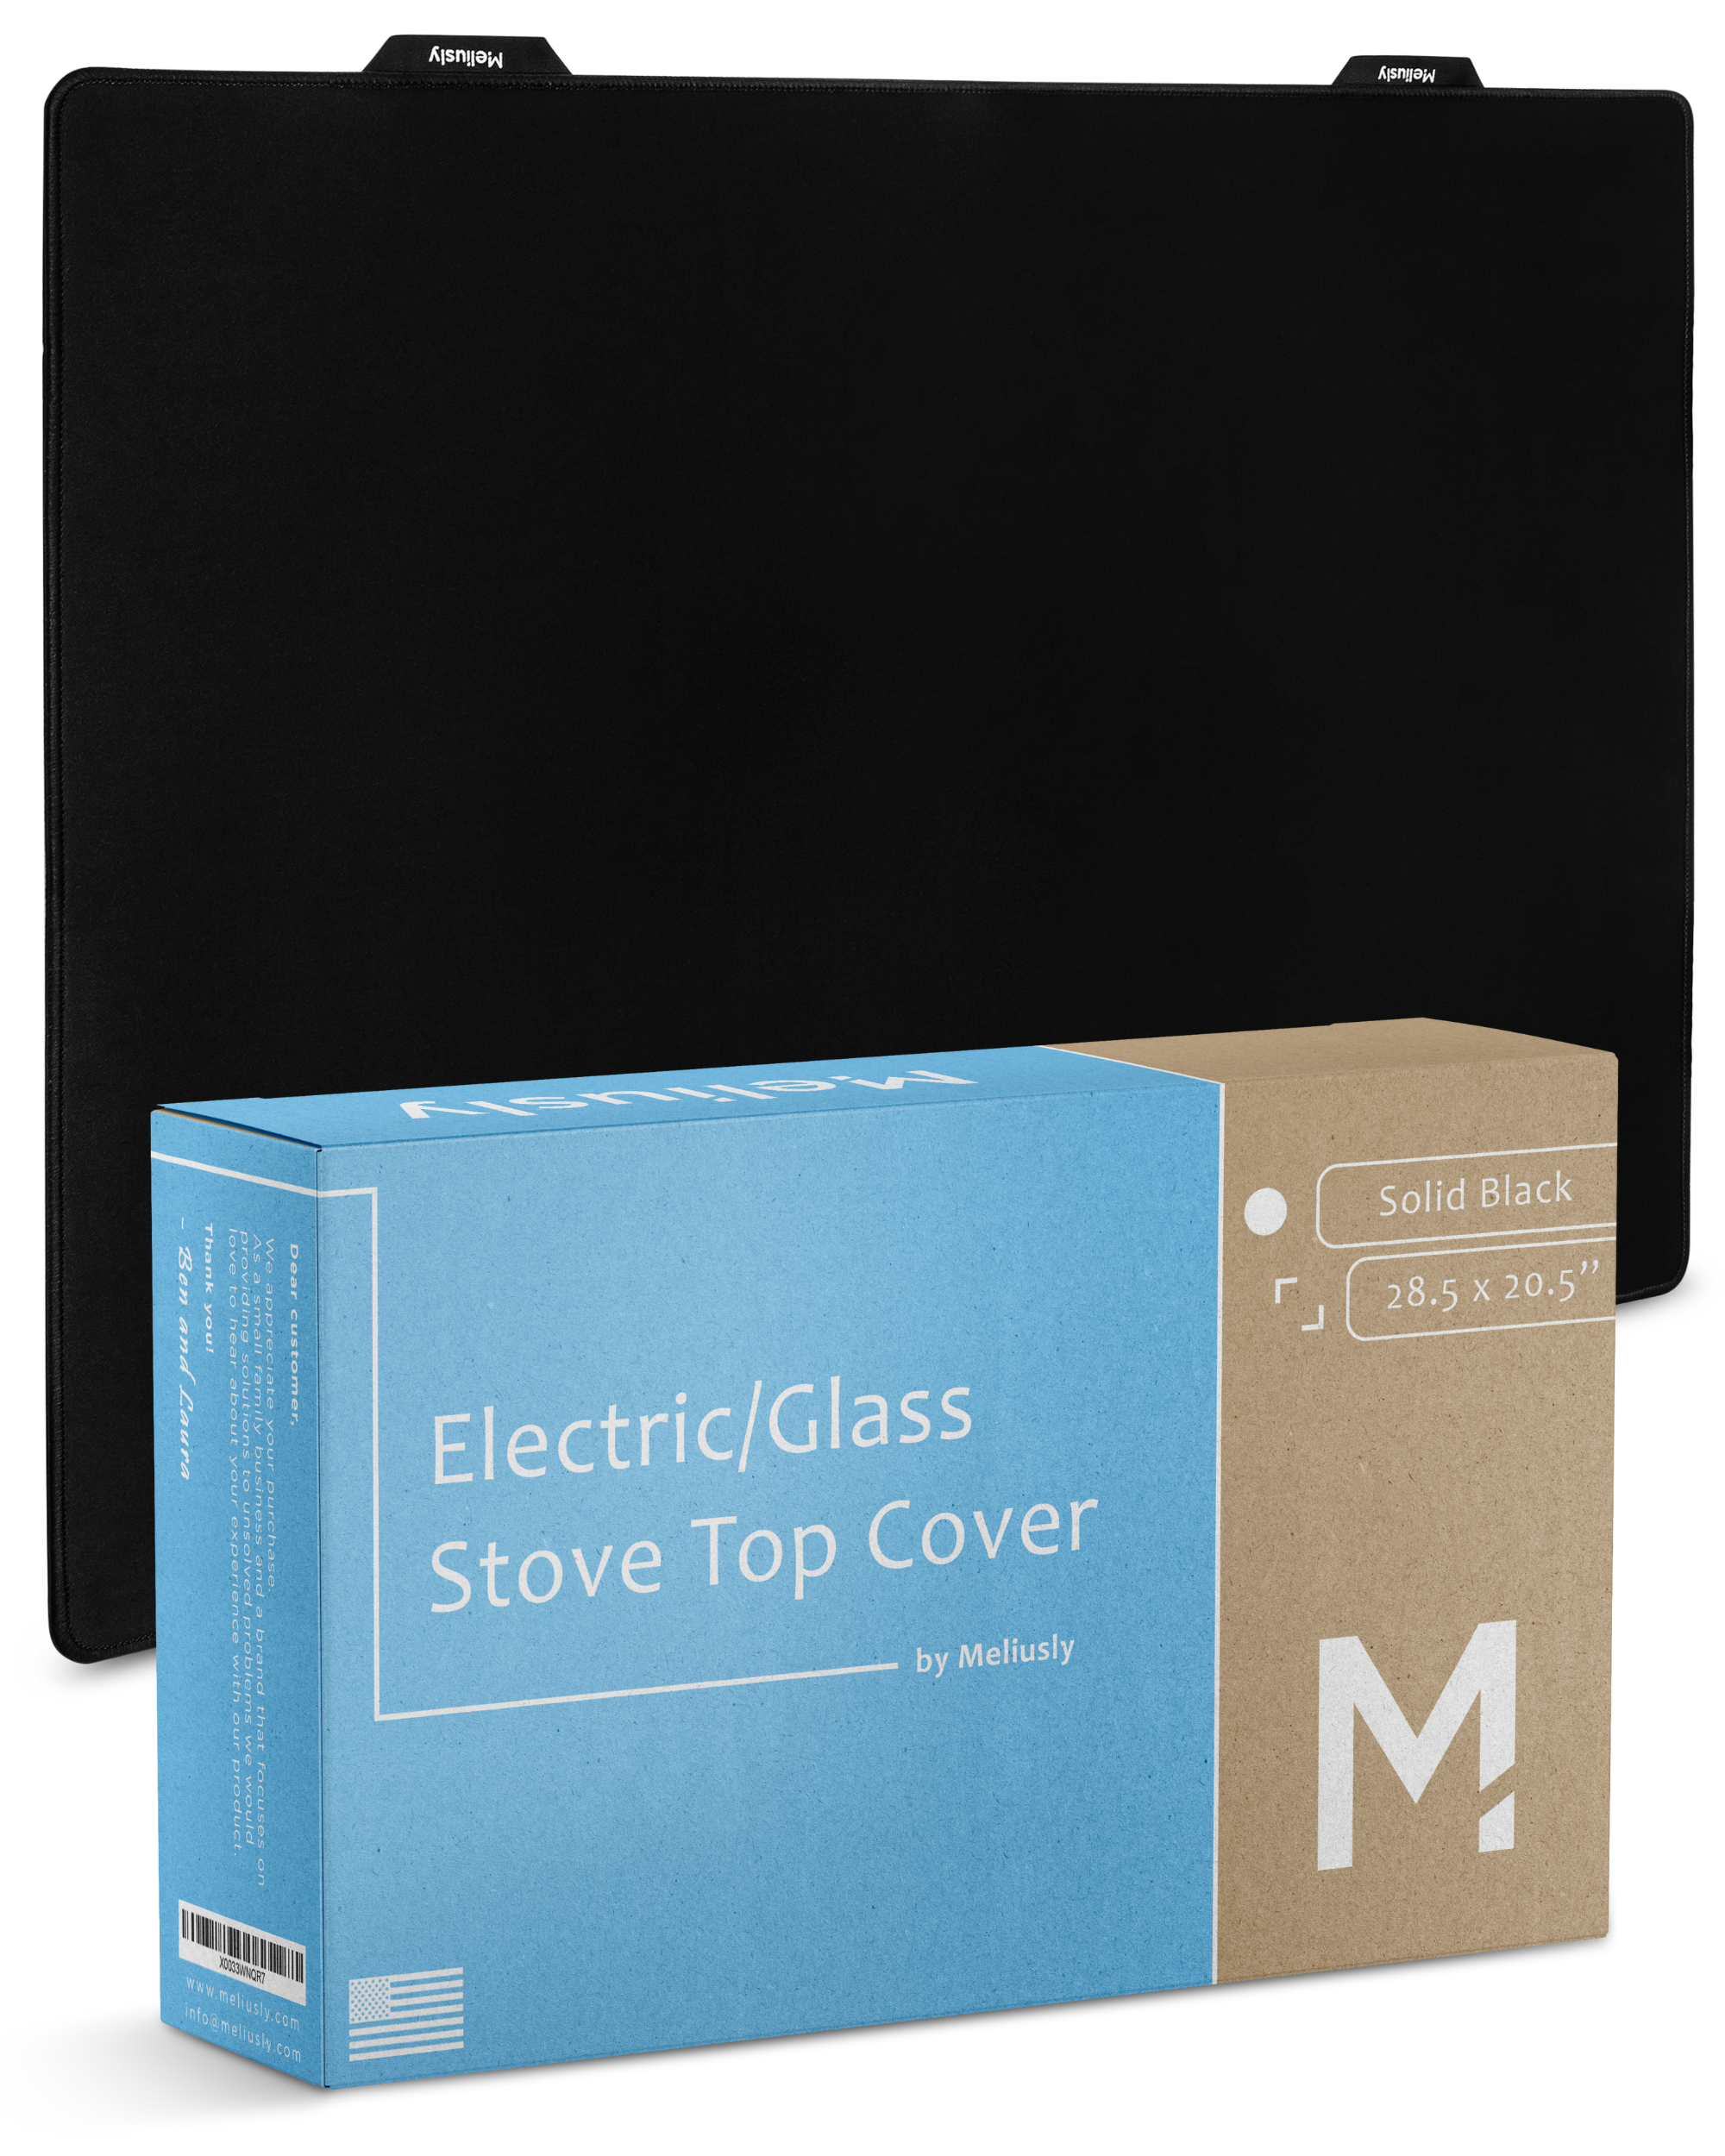  TYEMUI Cooktop Cover Mat for Glass Electric Stovetop